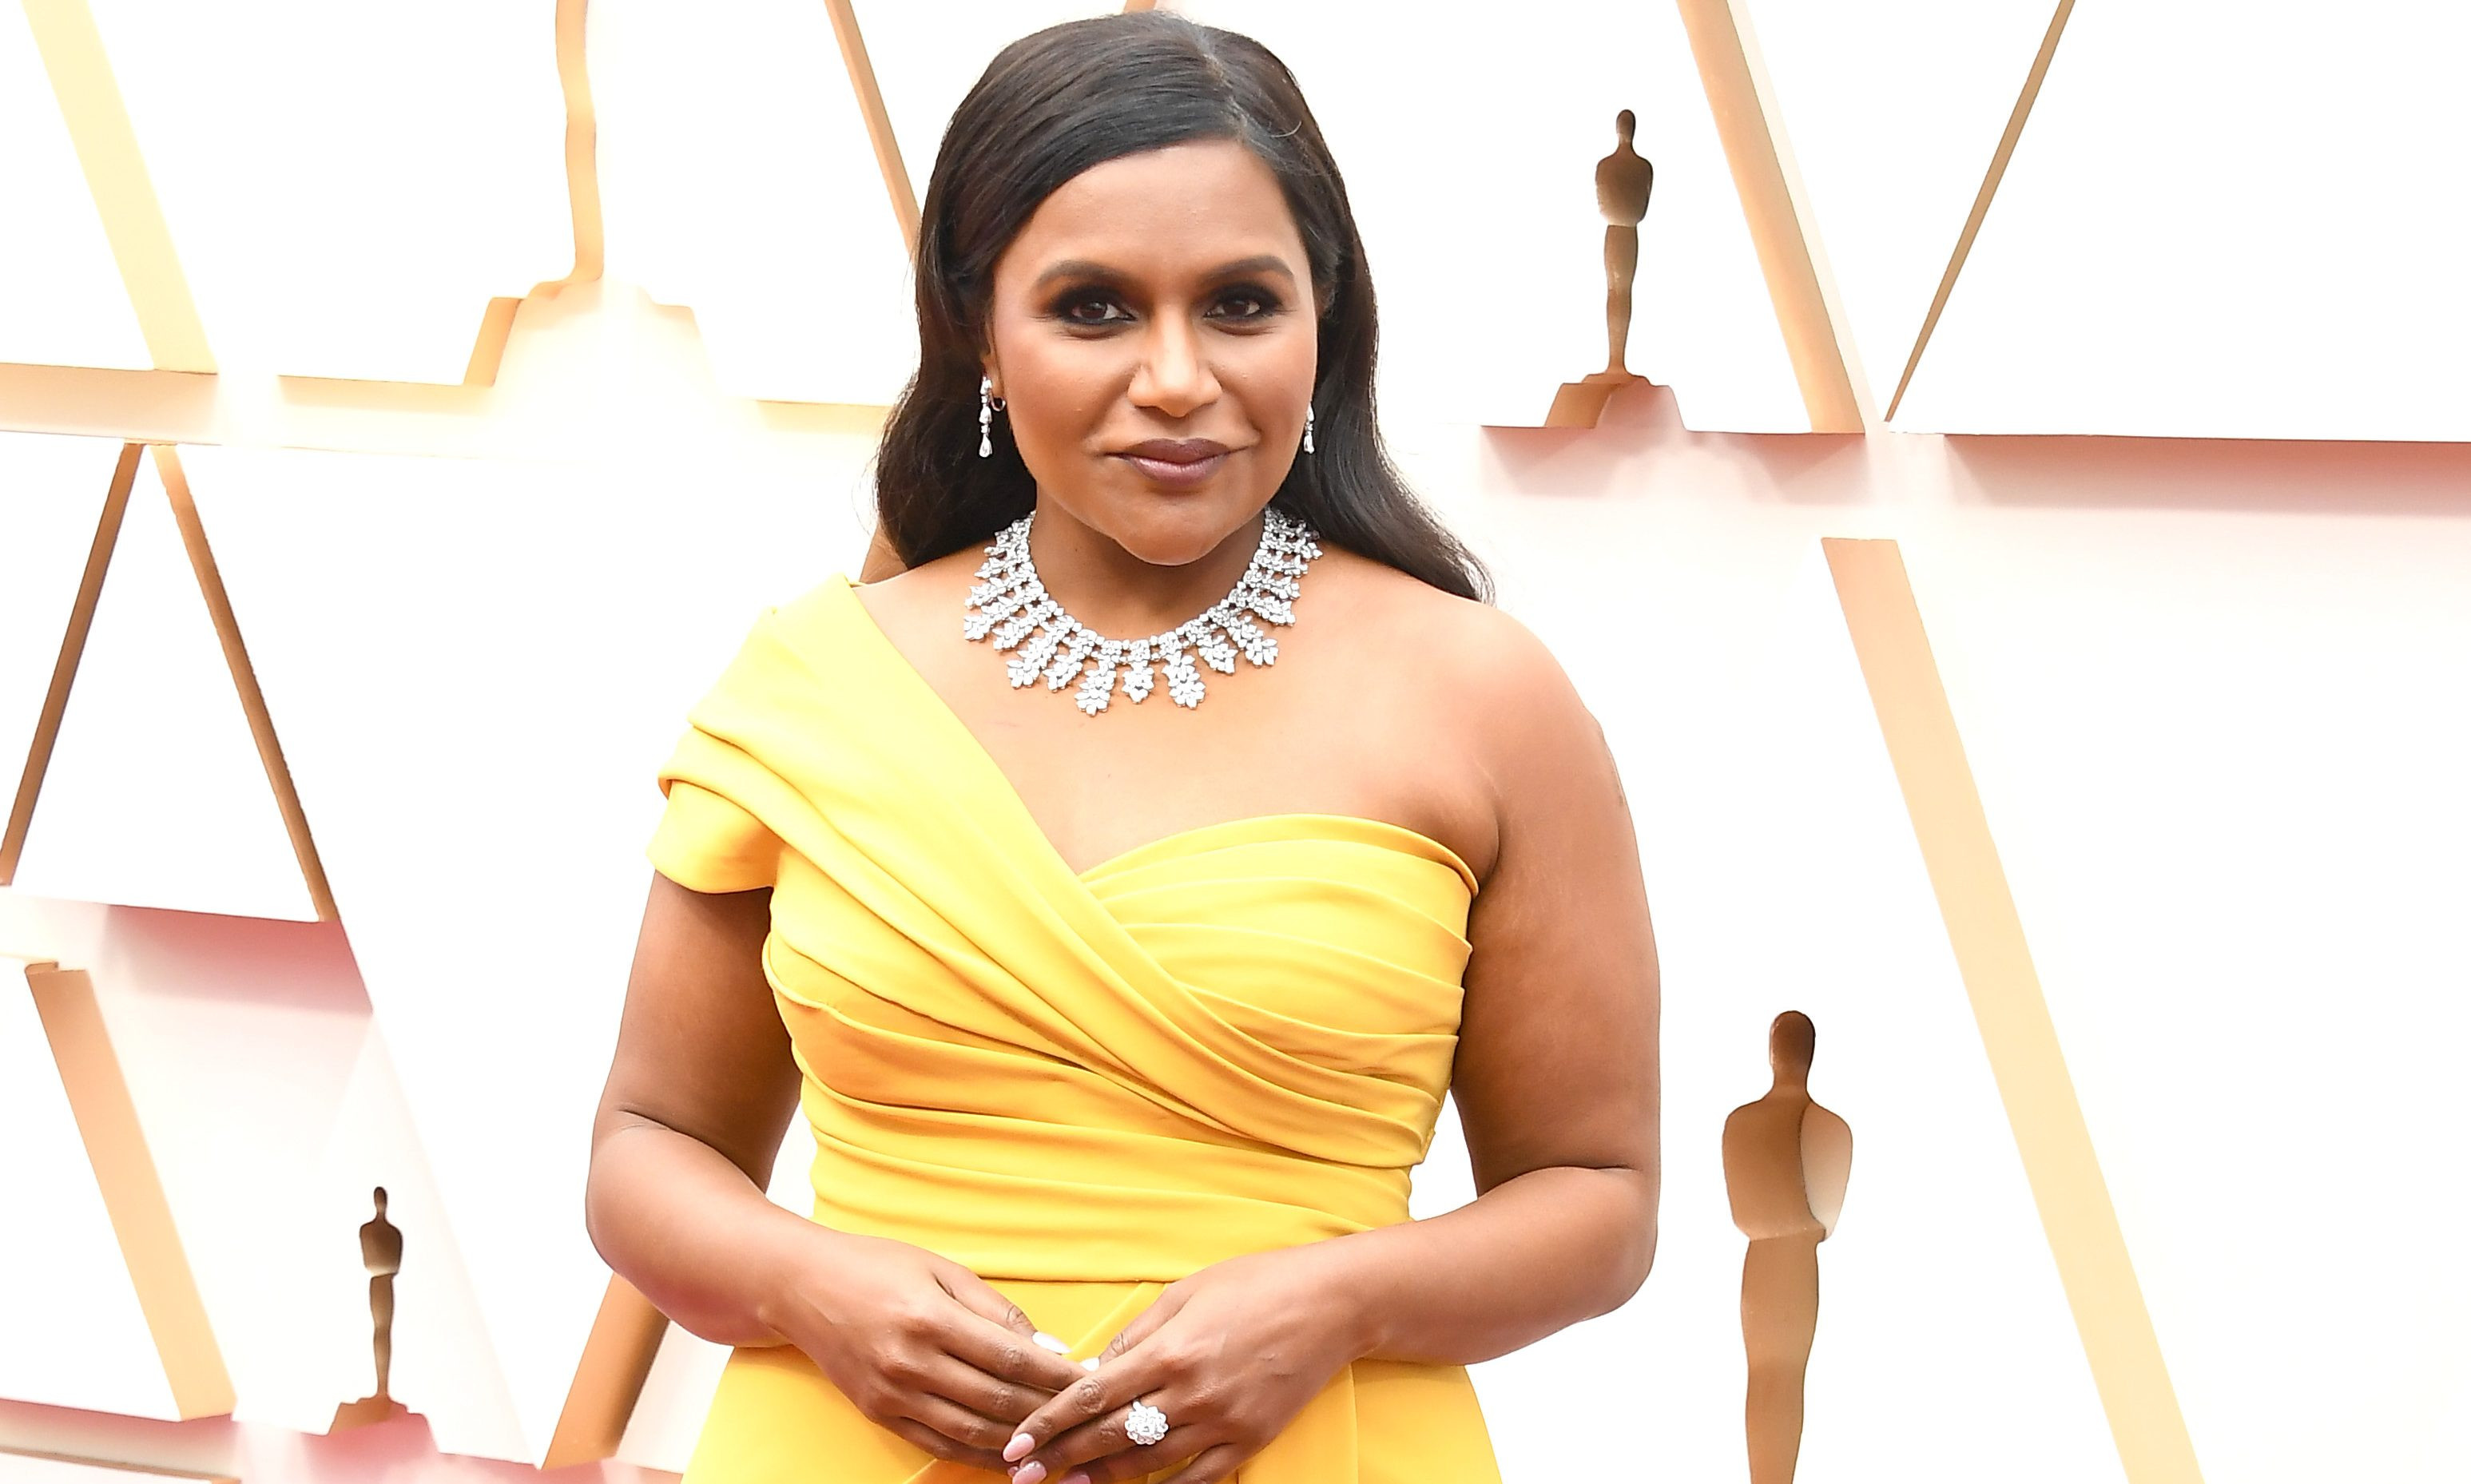 Mindy Kaling has best response for troll who slammed new role as Scooby Doo’s Velma in origin series